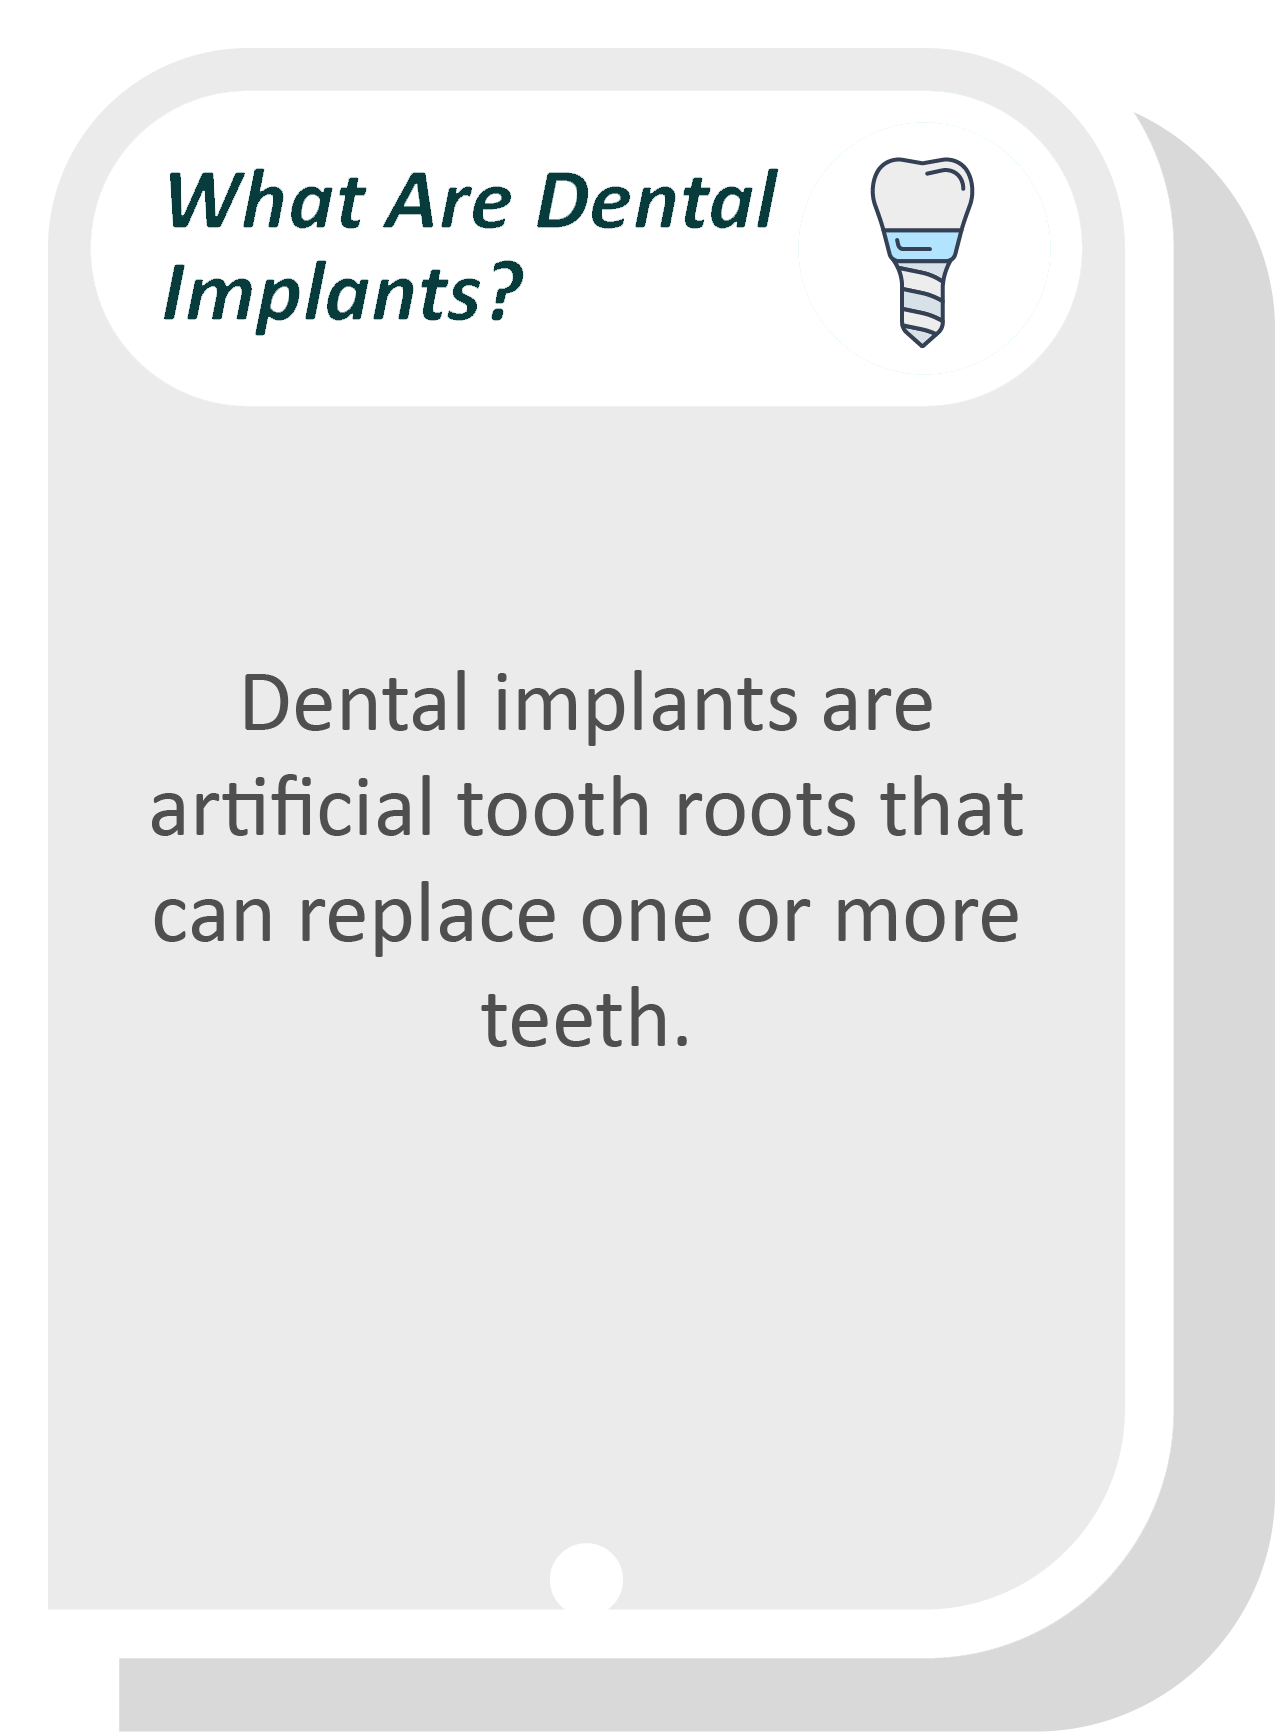 Dental implants infographic: Dental implants are artificial tooth roots that can replace one or more teeth.